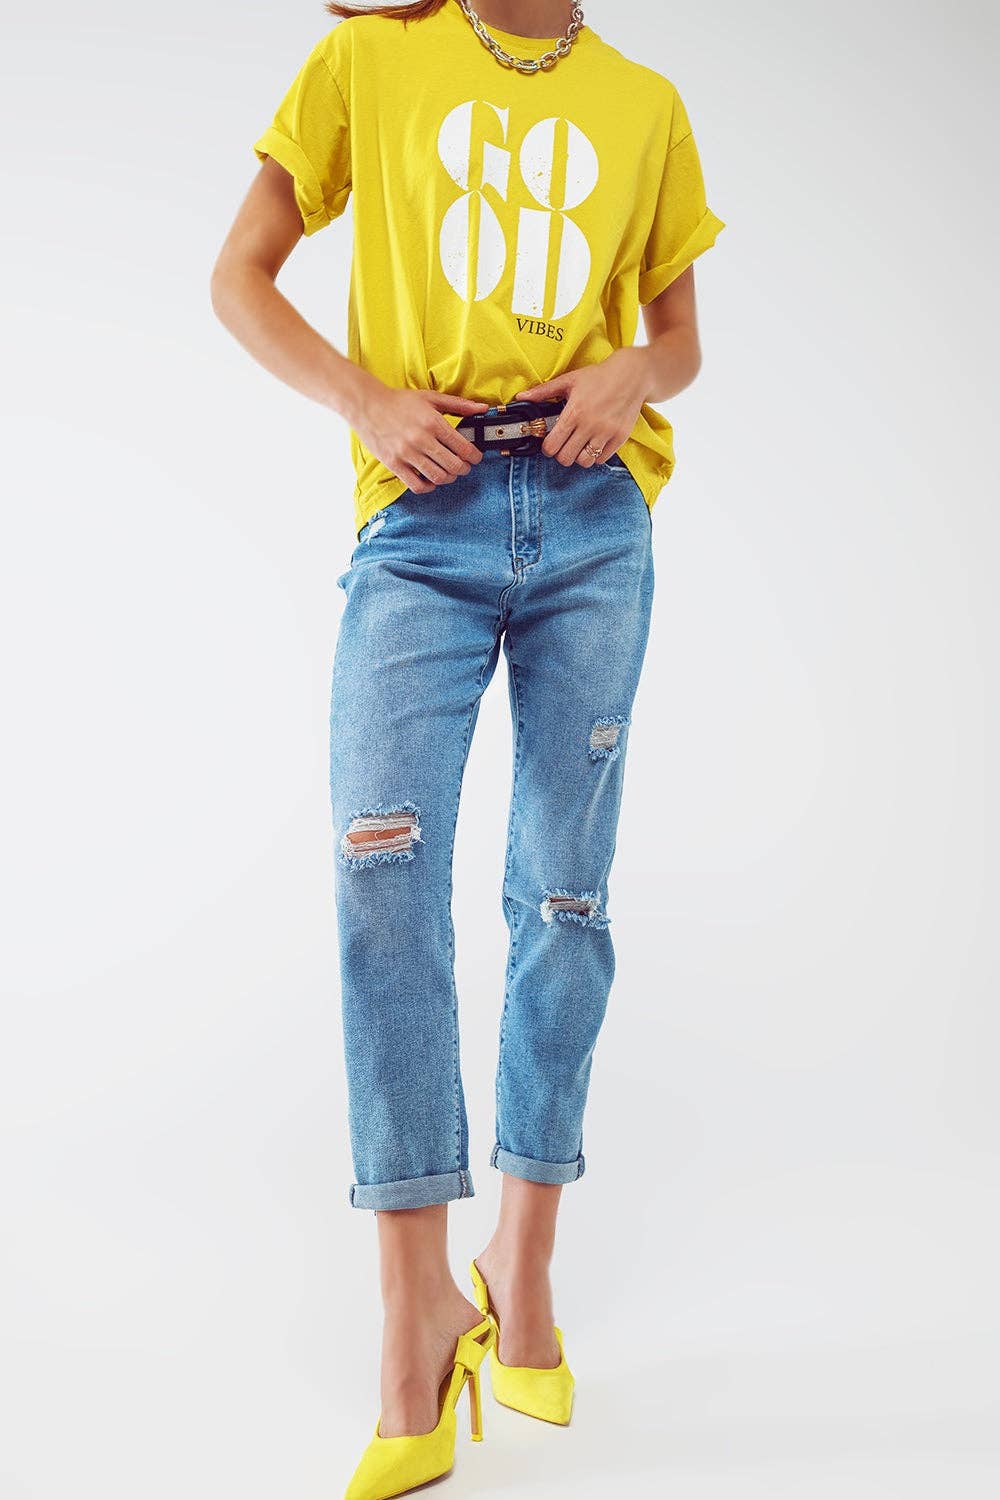 Distressed Regular Jeans in Light Blue Wash: Extra Small / Blue - Something about Sofia